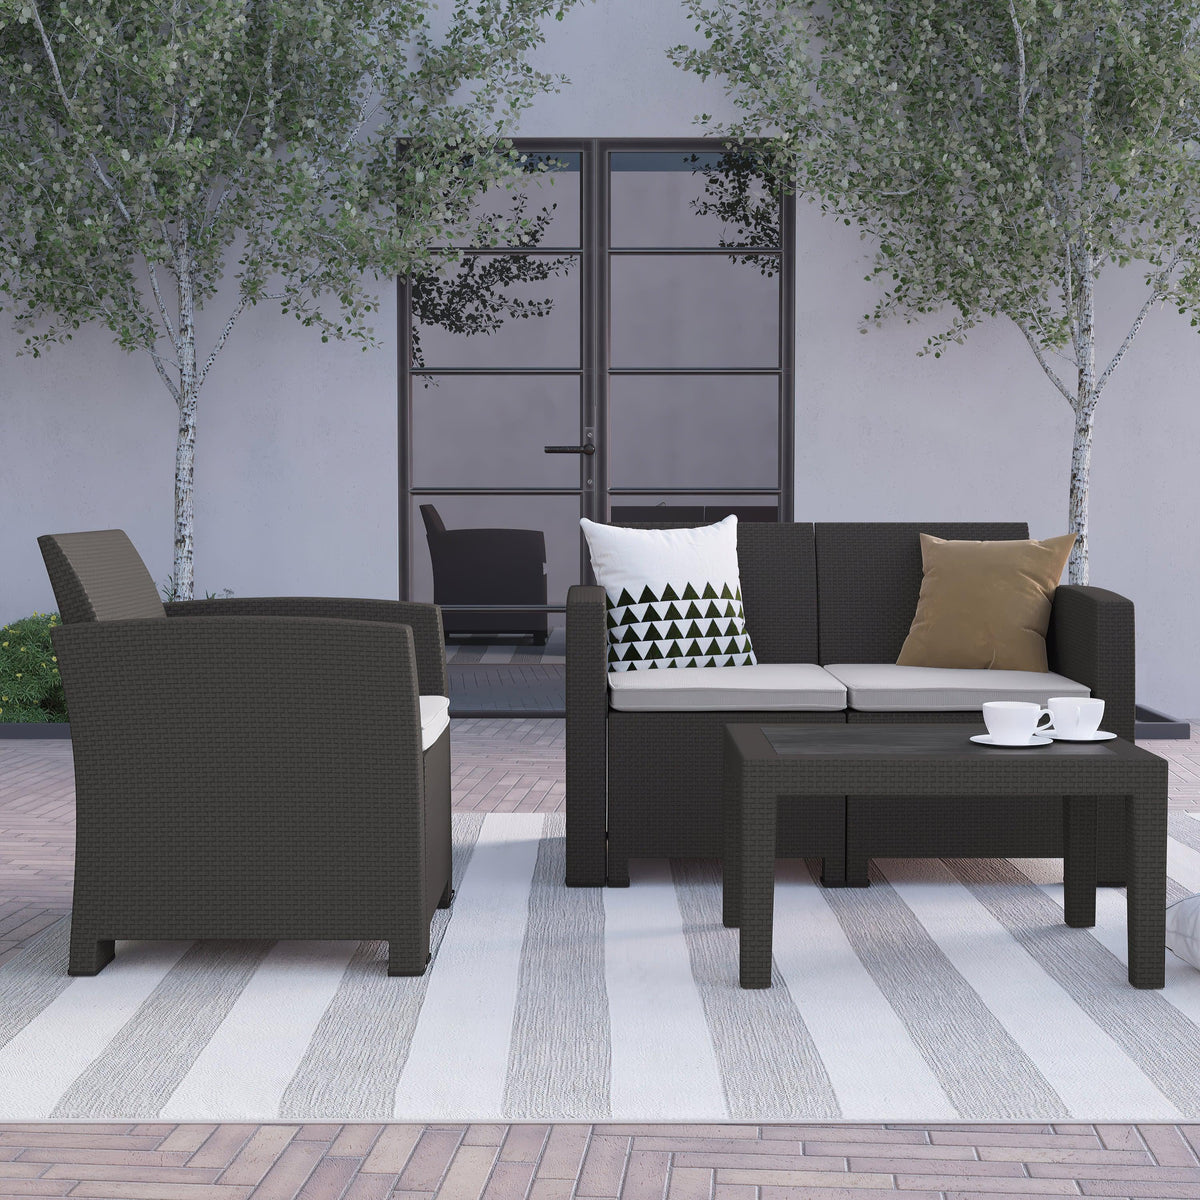 Dark Gray |#| 4 Piece Outdoor Faux Rattan Chair, Loveseat and Table Set in Dark Gray